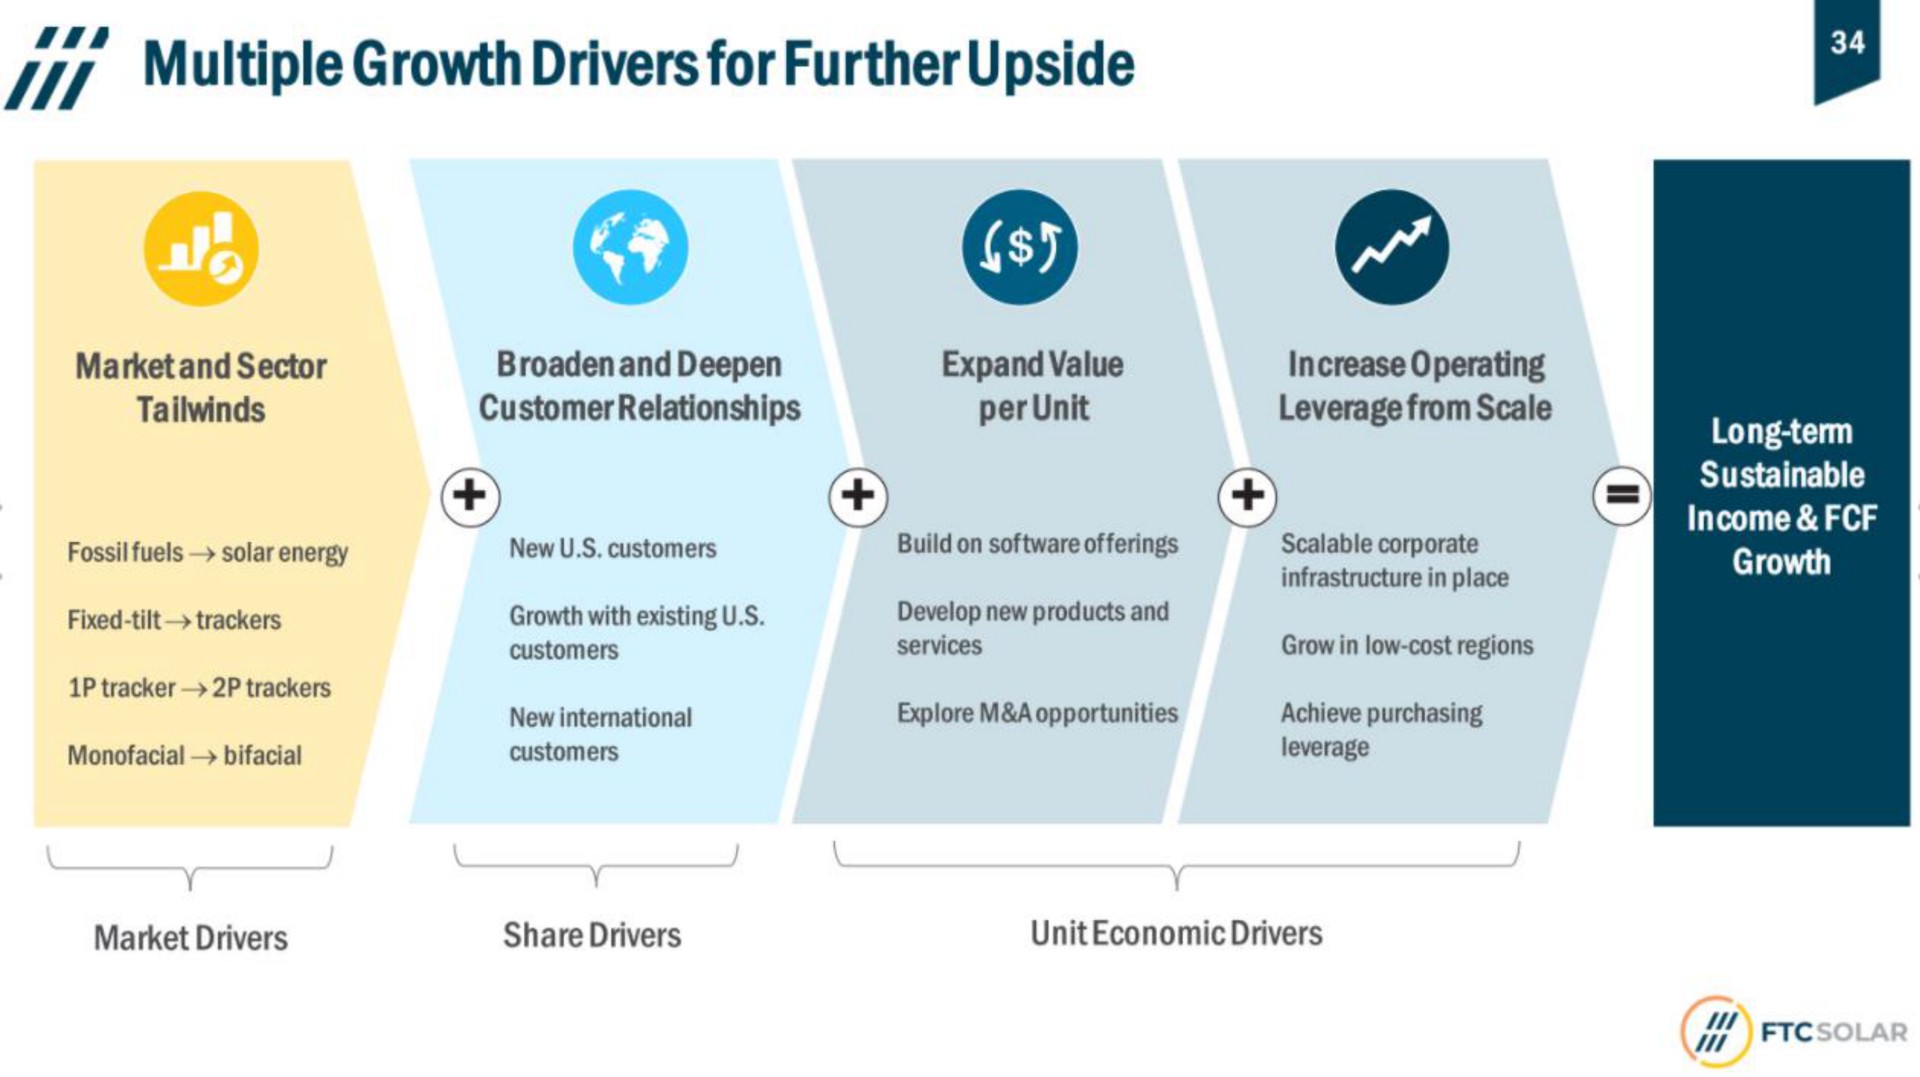 a multiple growth drivers for further upside | FTC Solar